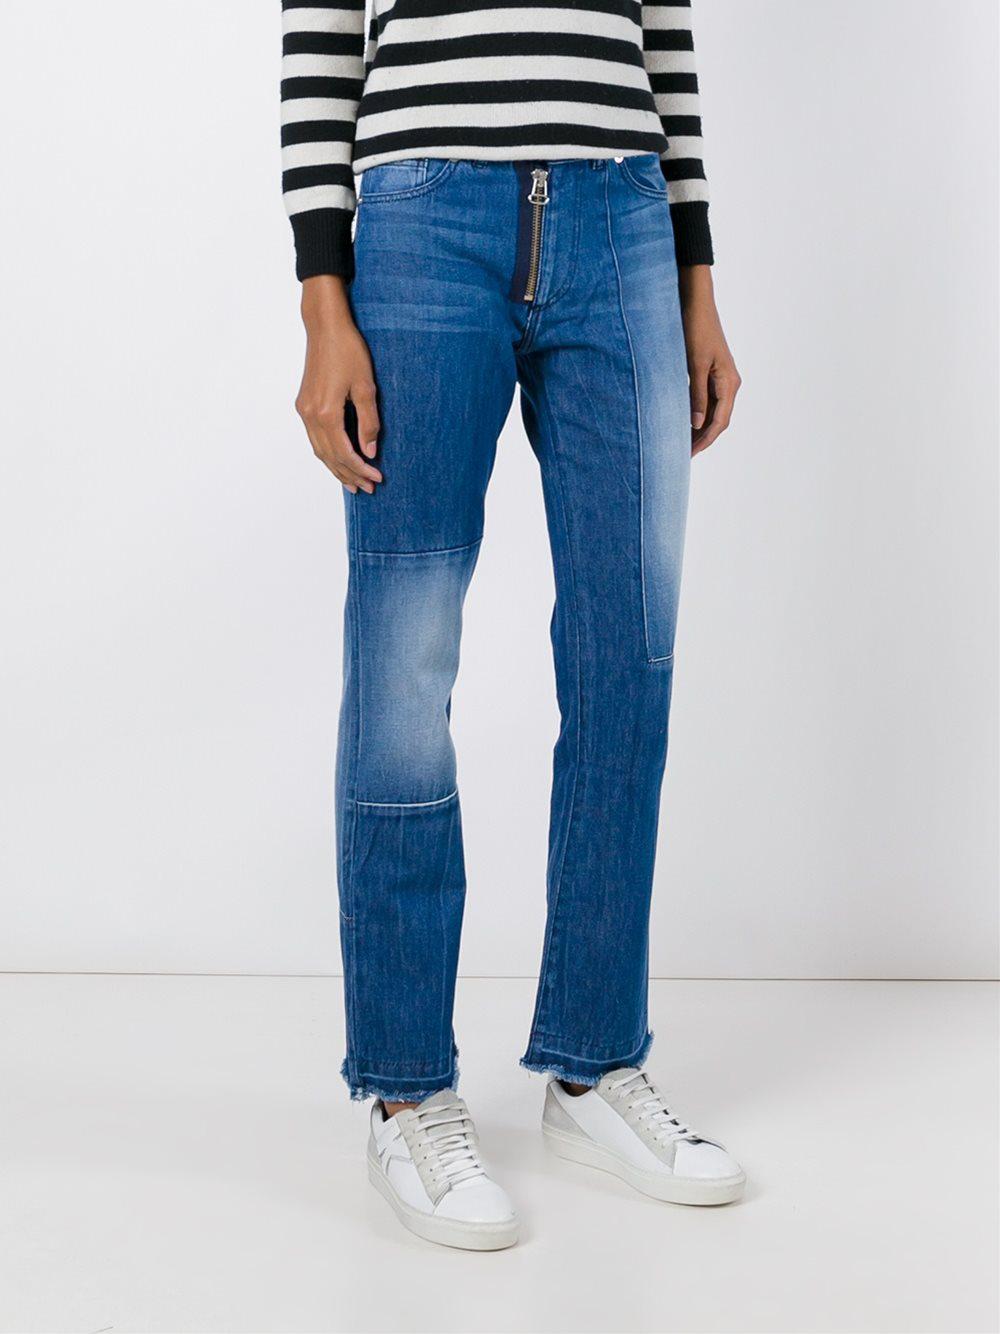 Lyst - Each x Other Patchwork Straight-leg Jeans in Blue